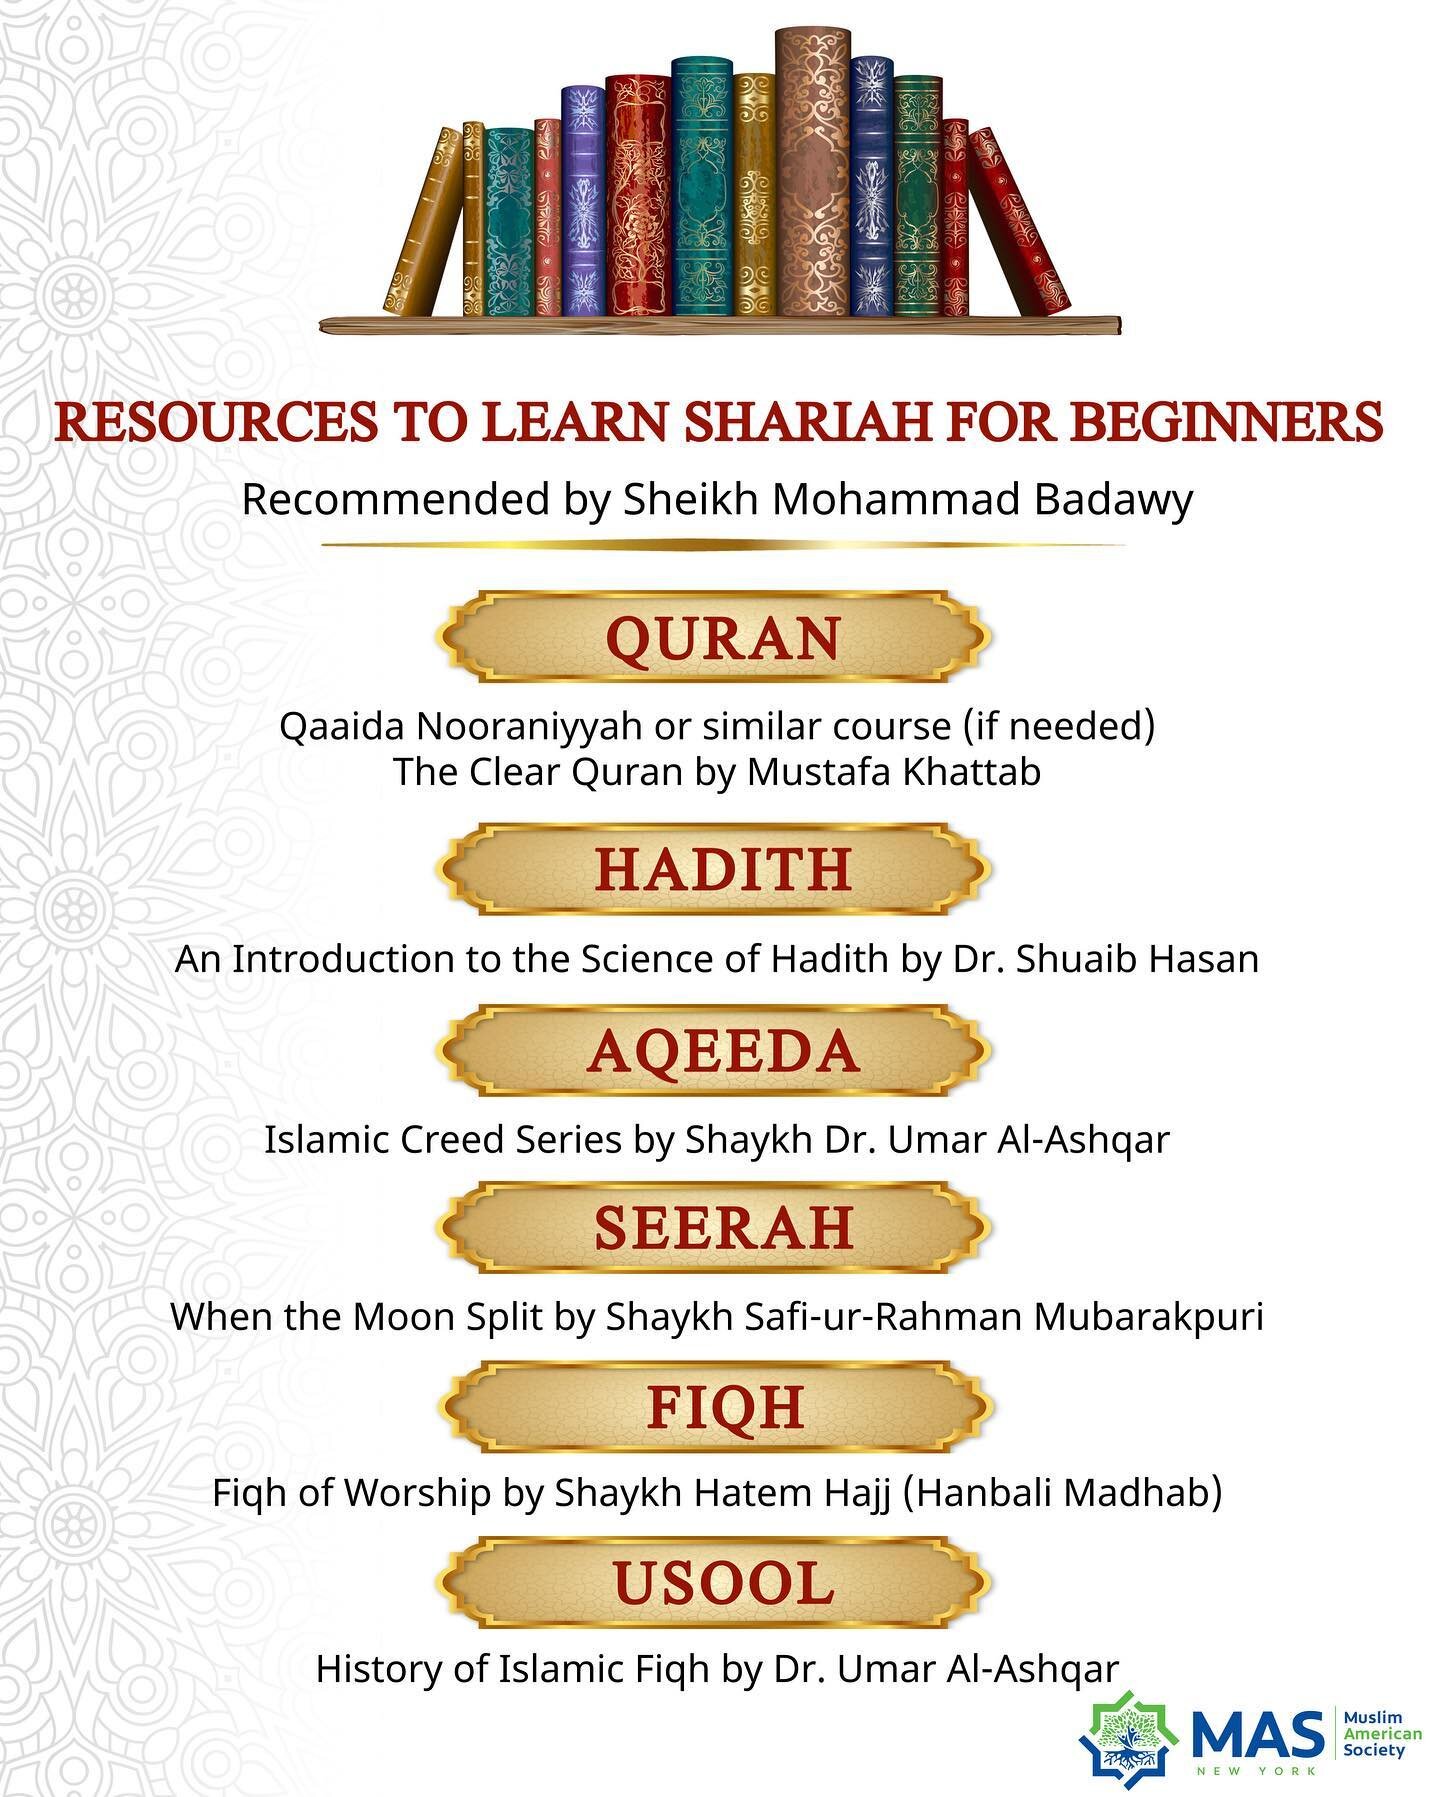 Updated list!

In the course Understanding the Shariah, Shaykh Mohammed Badawy provided a list of resources to help us build the foundations in the different aspects of our faith. 

Make it your goal to go through these books through the next year or